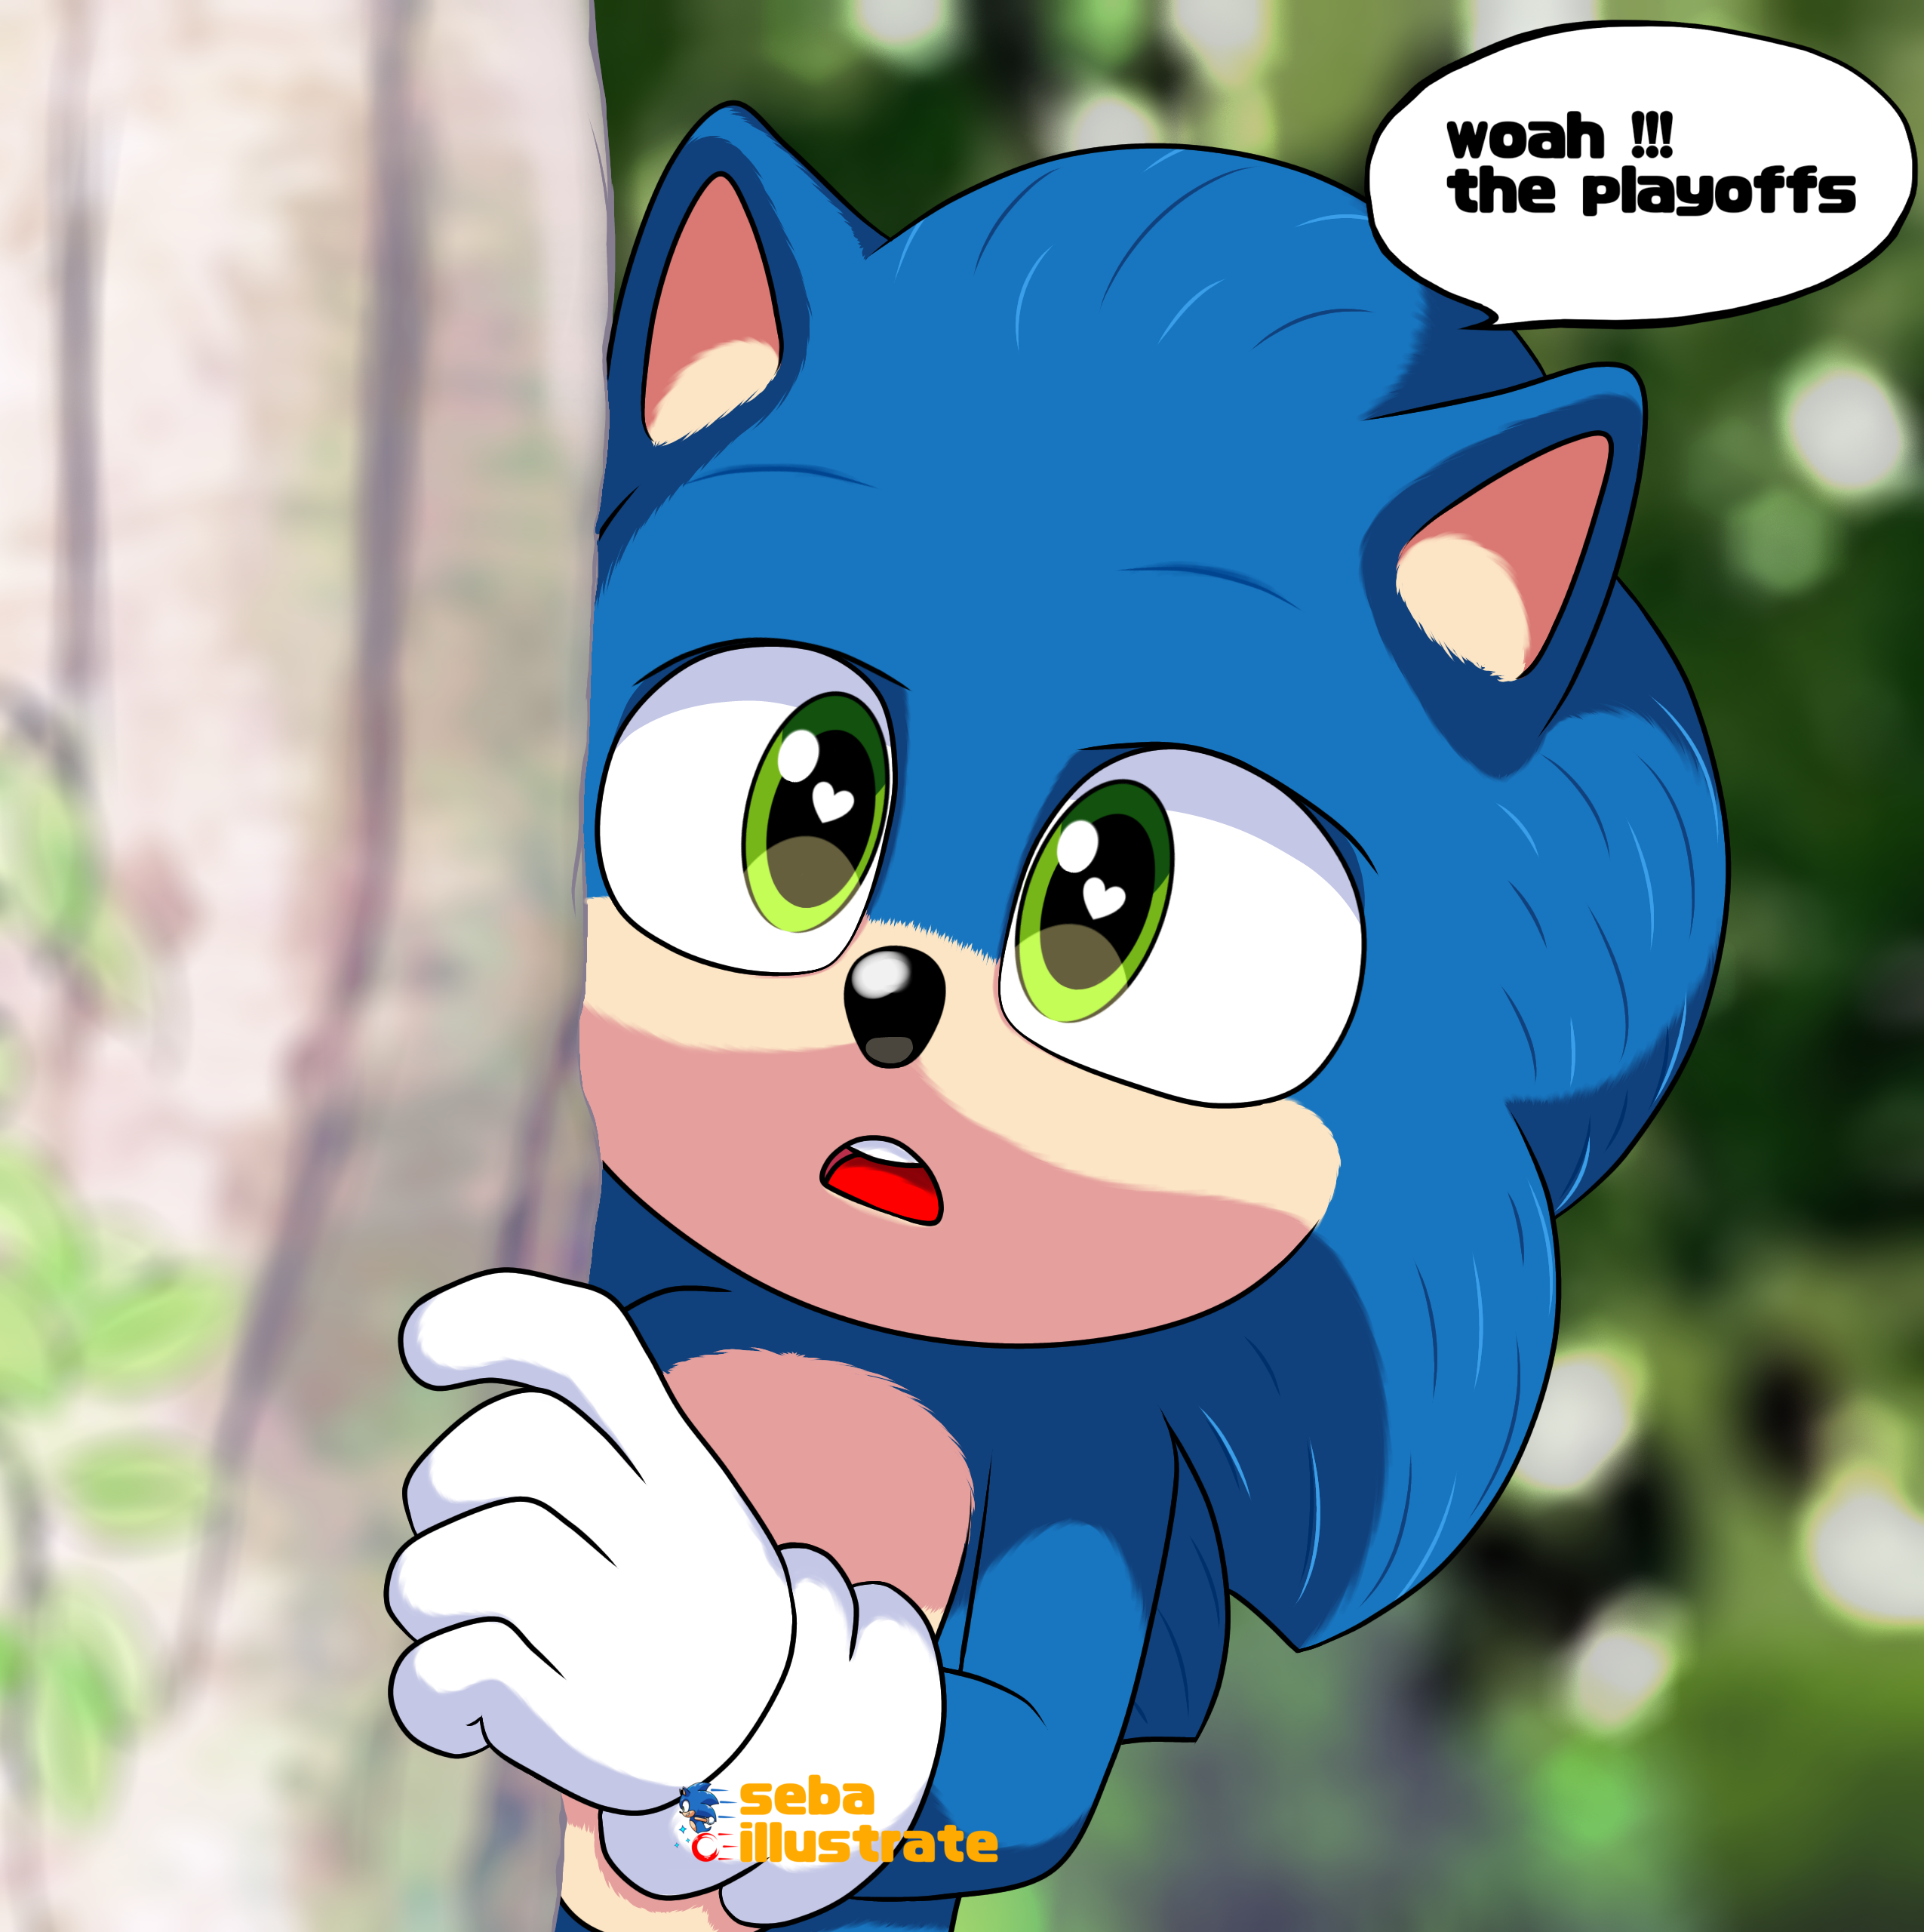 Seba Illustrate on X: #SonicMovie2 #SonicTheHedgehog #SEGA音  #supersonicmovie super sonic movie in the style of my old (lost) drawings  I'm testing a new drawing app *#ParamountPlus #SONIC #sonicart   / X